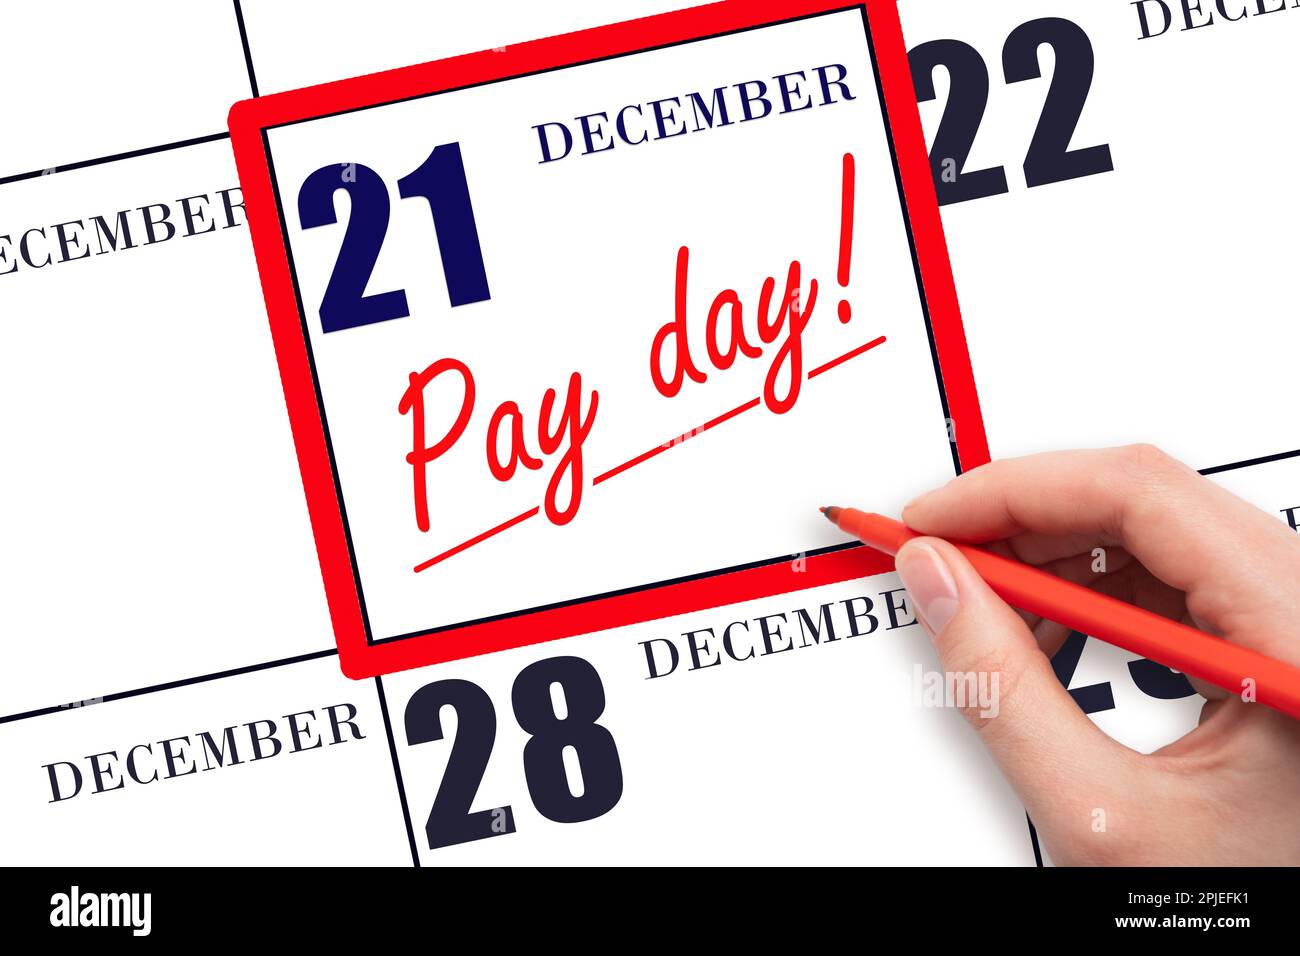 21st day of December. Hand writing text PAY DATE on calendar date December 21 and underline it. Payment due date. Reminder concept of payment. Winter Stock Photo